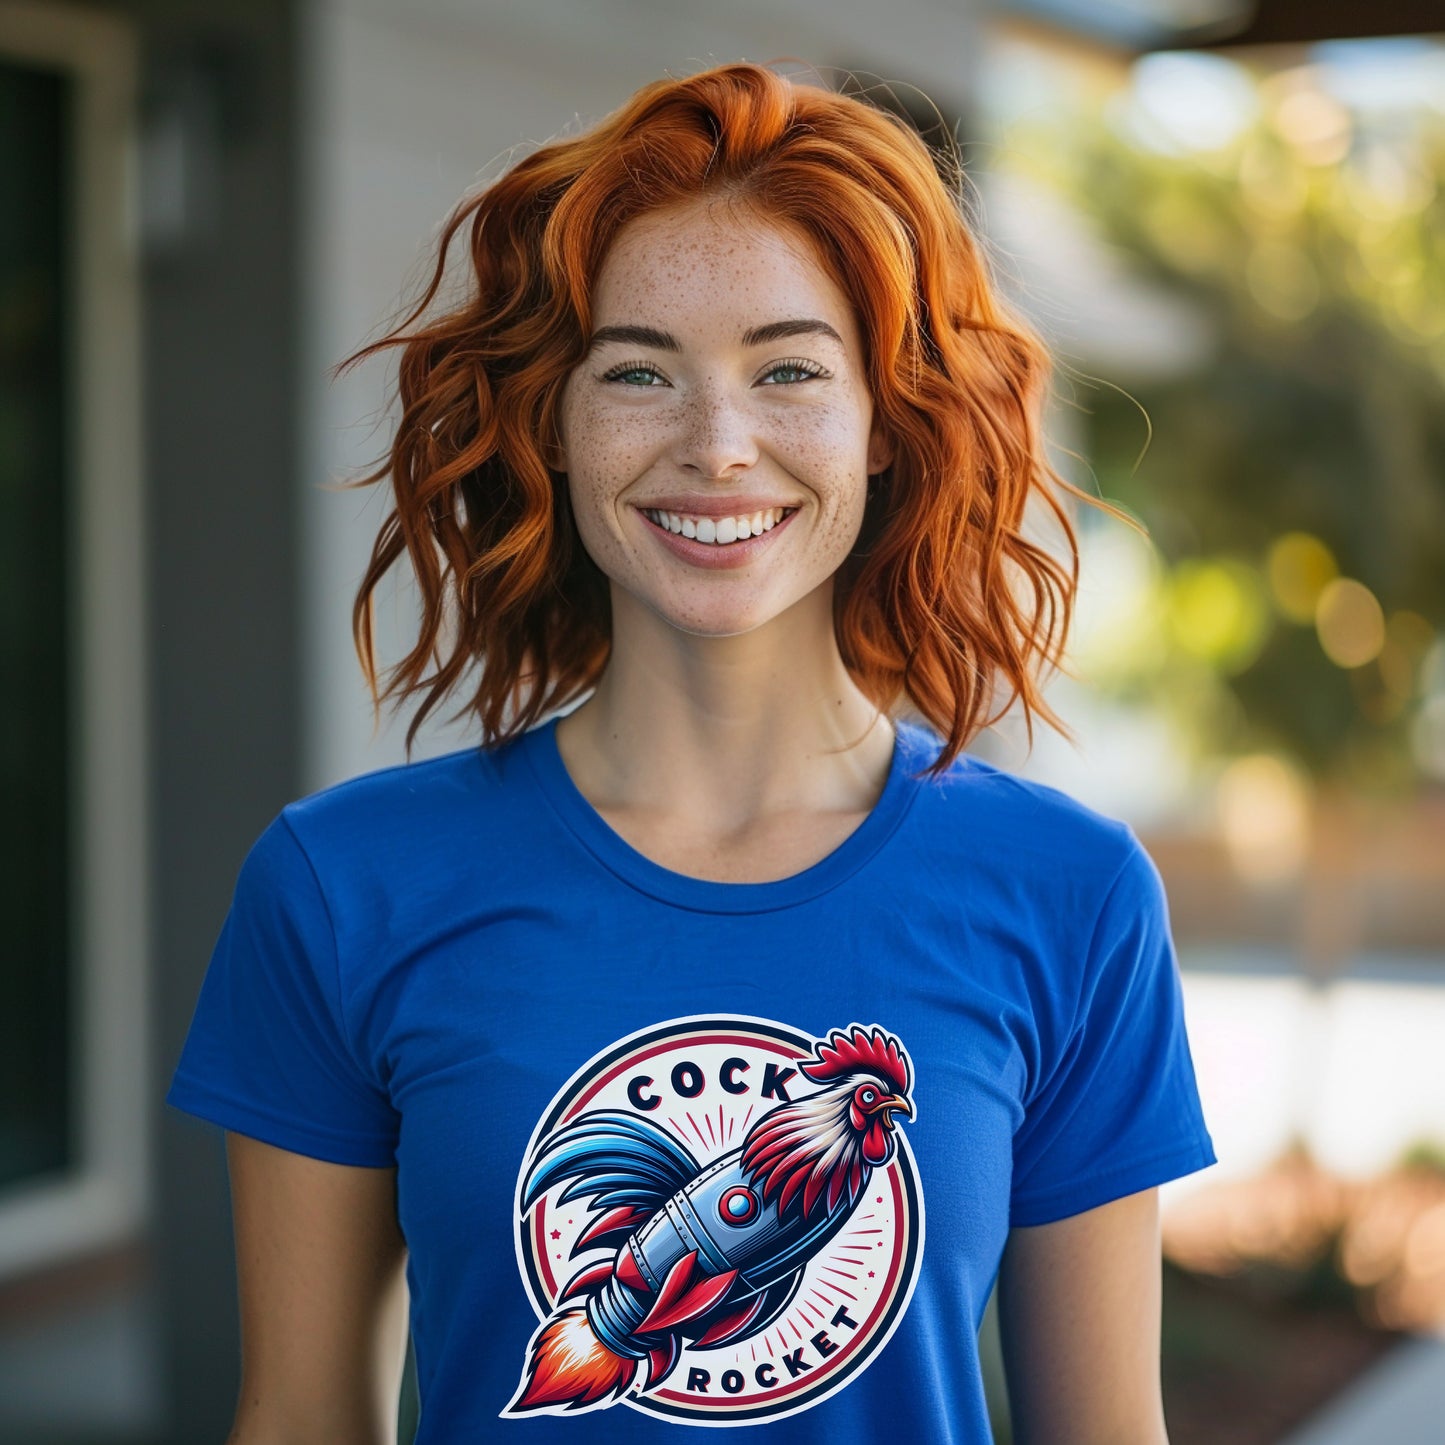 Patriotic Rooster Rocket T-Shirt in Red, White, and Blue - Independence Day Rooster T-Shirt, Red, White and Blue Space Rooster T-Shirt Gift